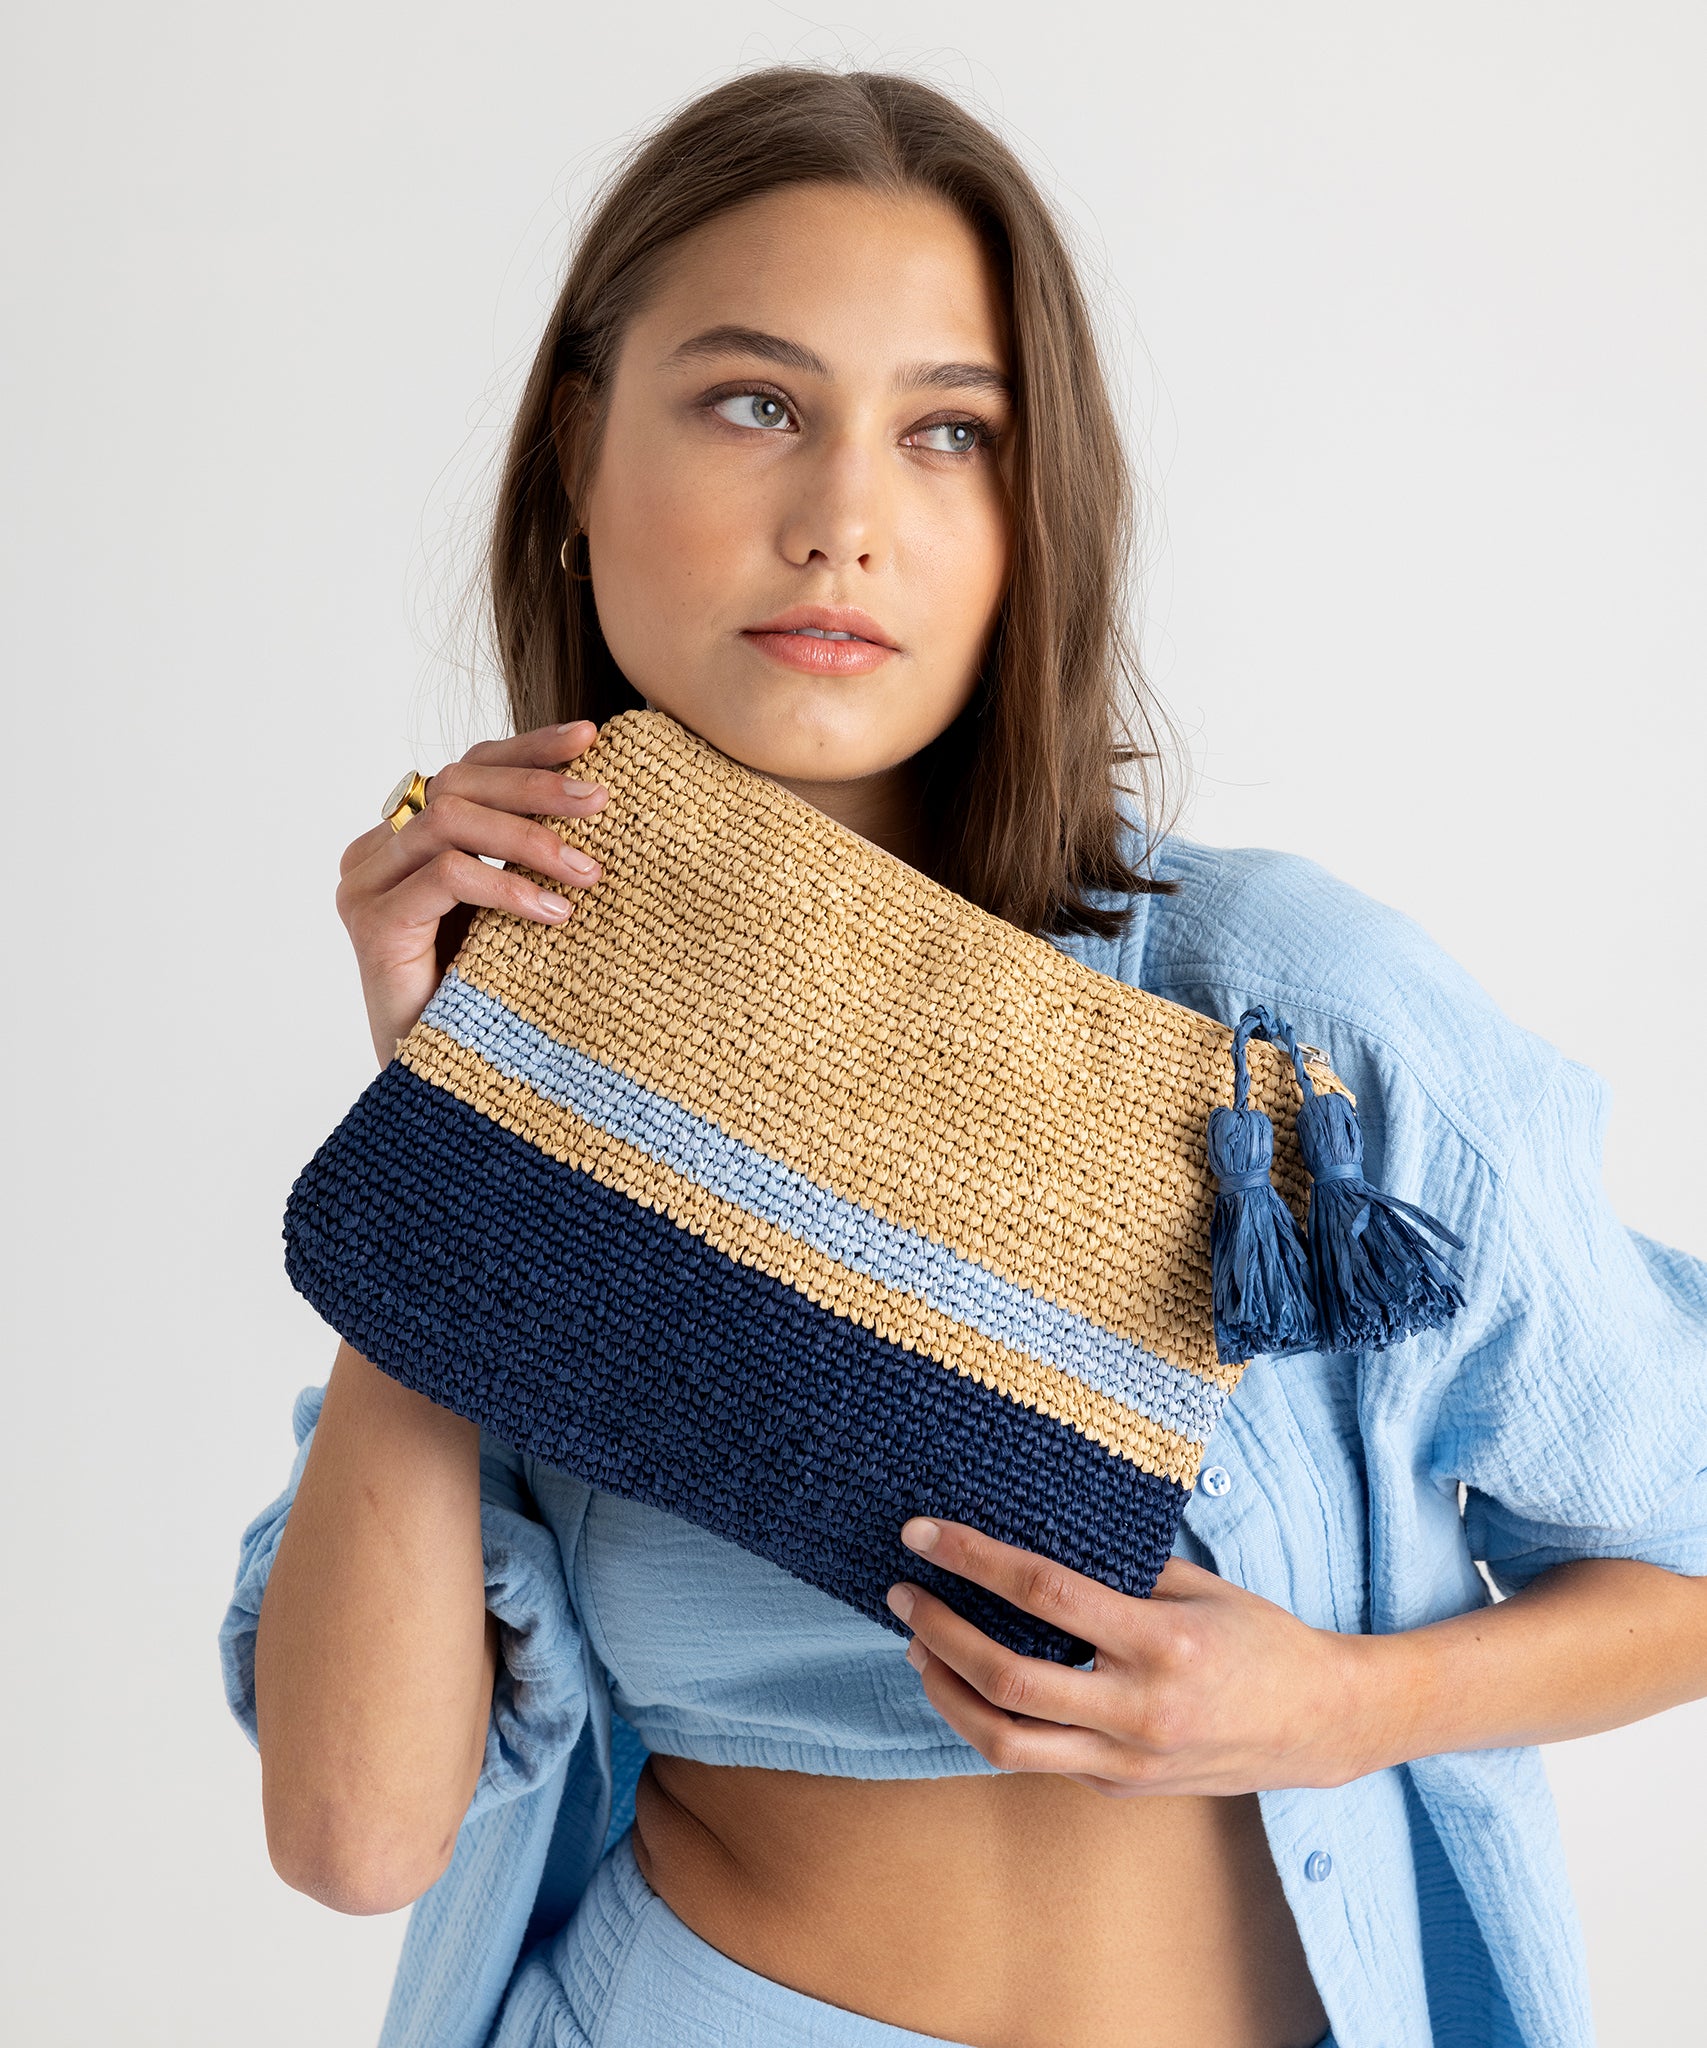 Tropic Stripe Clutch in color Natural/Navy held by model